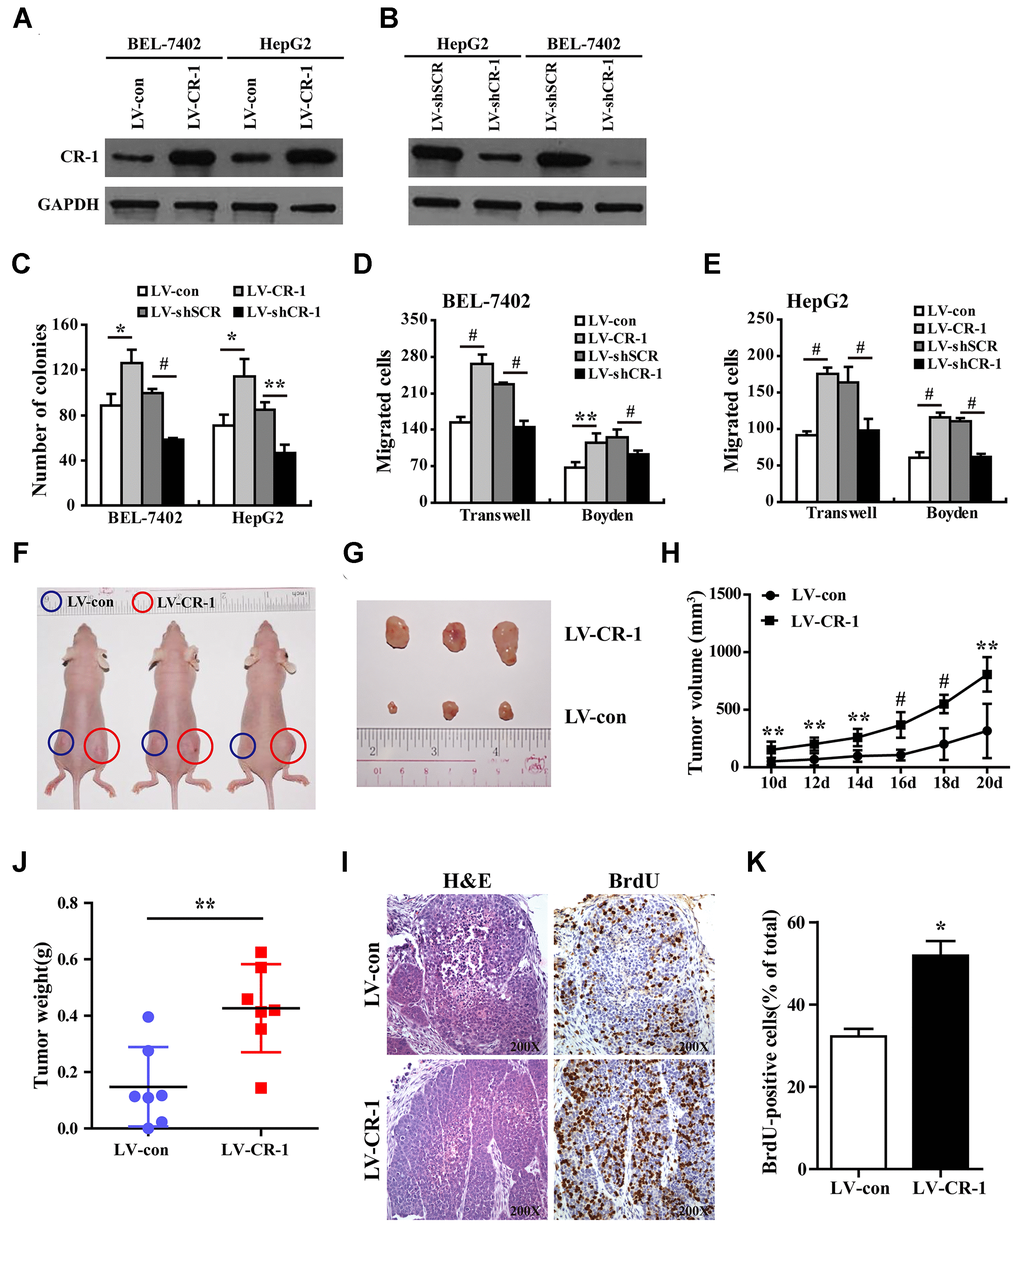 CR-1 overexpression promotes in vitro proliferation, migration and invasion of HCC cells and in vivo xenograft HCC growth in nude mice. (A) Western blot analysis shows CR-1 protein expression in control (LV-con) and CR-1-overexpressing (LV-CR-1) BEL-7402 and HepG2 cells. (B) Western blot analysis shows CR-1 protein expression in scrambled control (LV-shSCR) and CR-1-silenced (LV-shCR-1) BEL-7402 and HepG2 cells. (C) Colony formation assay results show proliferation ability of CR-1-overexpressing and CR-1-knockdown HCC cells with their corresponding controls. The representative images of this assay are shown in Supplementary Figure 5. (D–E) Transwell migration and Boyden invasion assay results show the migration and invasion abilities of CR-1-overexpressing, CR-1-knockdown, and control BEL-7402 (D) and HepG2 (E) cells, respectively. (F) Representative pictures of nude mice bearing subcutaneous xenografts from LV-con (blue circle) or LV-CR-1 (red circle) transduced BEL-7402 cells. (G) Representative images of subcutaneous xenograft tumors formed from LV-con or LV-CR-1 transduced BEL-7402 cells. (H) Growth curve of xenograft tumor volumes derived from LV-con or LV-CR-1 transduced BEL-7402 cells. (I) The weights of xenograft tumors derived from LV-con or LV-CR-1 transduced BEL-7402 cells. (J) Representative images of H&E-stained and BrdU-stained sections of xenograft tumors derived from LV-con or LV-CR-1 transduced BEL-7402 cells. (K) The percentages of BrdU-positive cancer cells in xenograft tumors derived from LV-con or LV-CR-1 transduced BEL-7402 cells, as calculated by total number of BrdU-positive cells relative to total number of cancer cells.